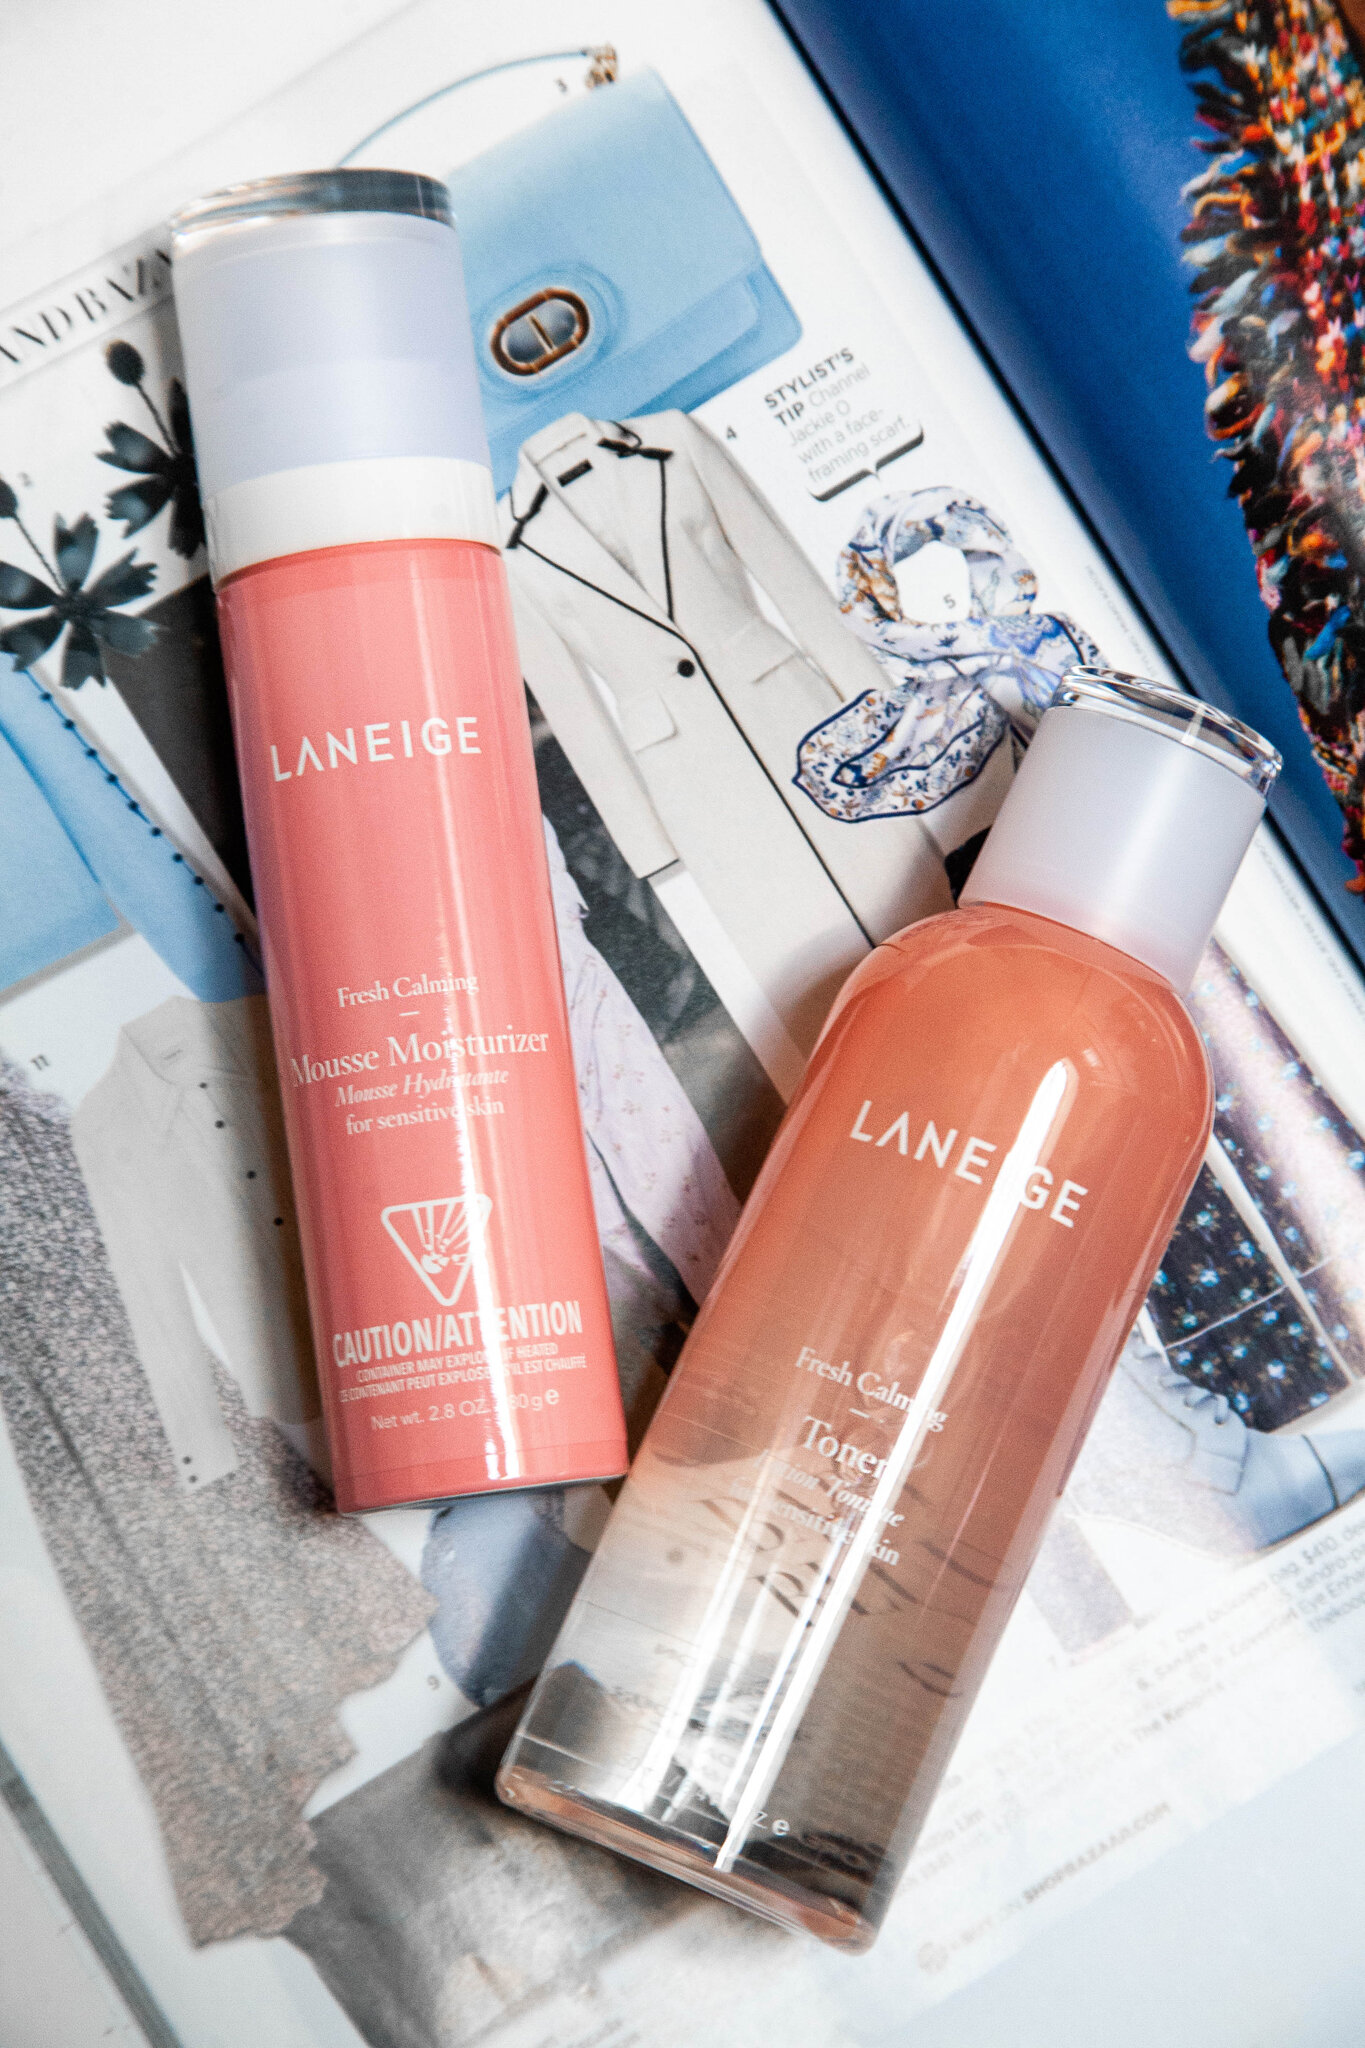 Laneige skincare products